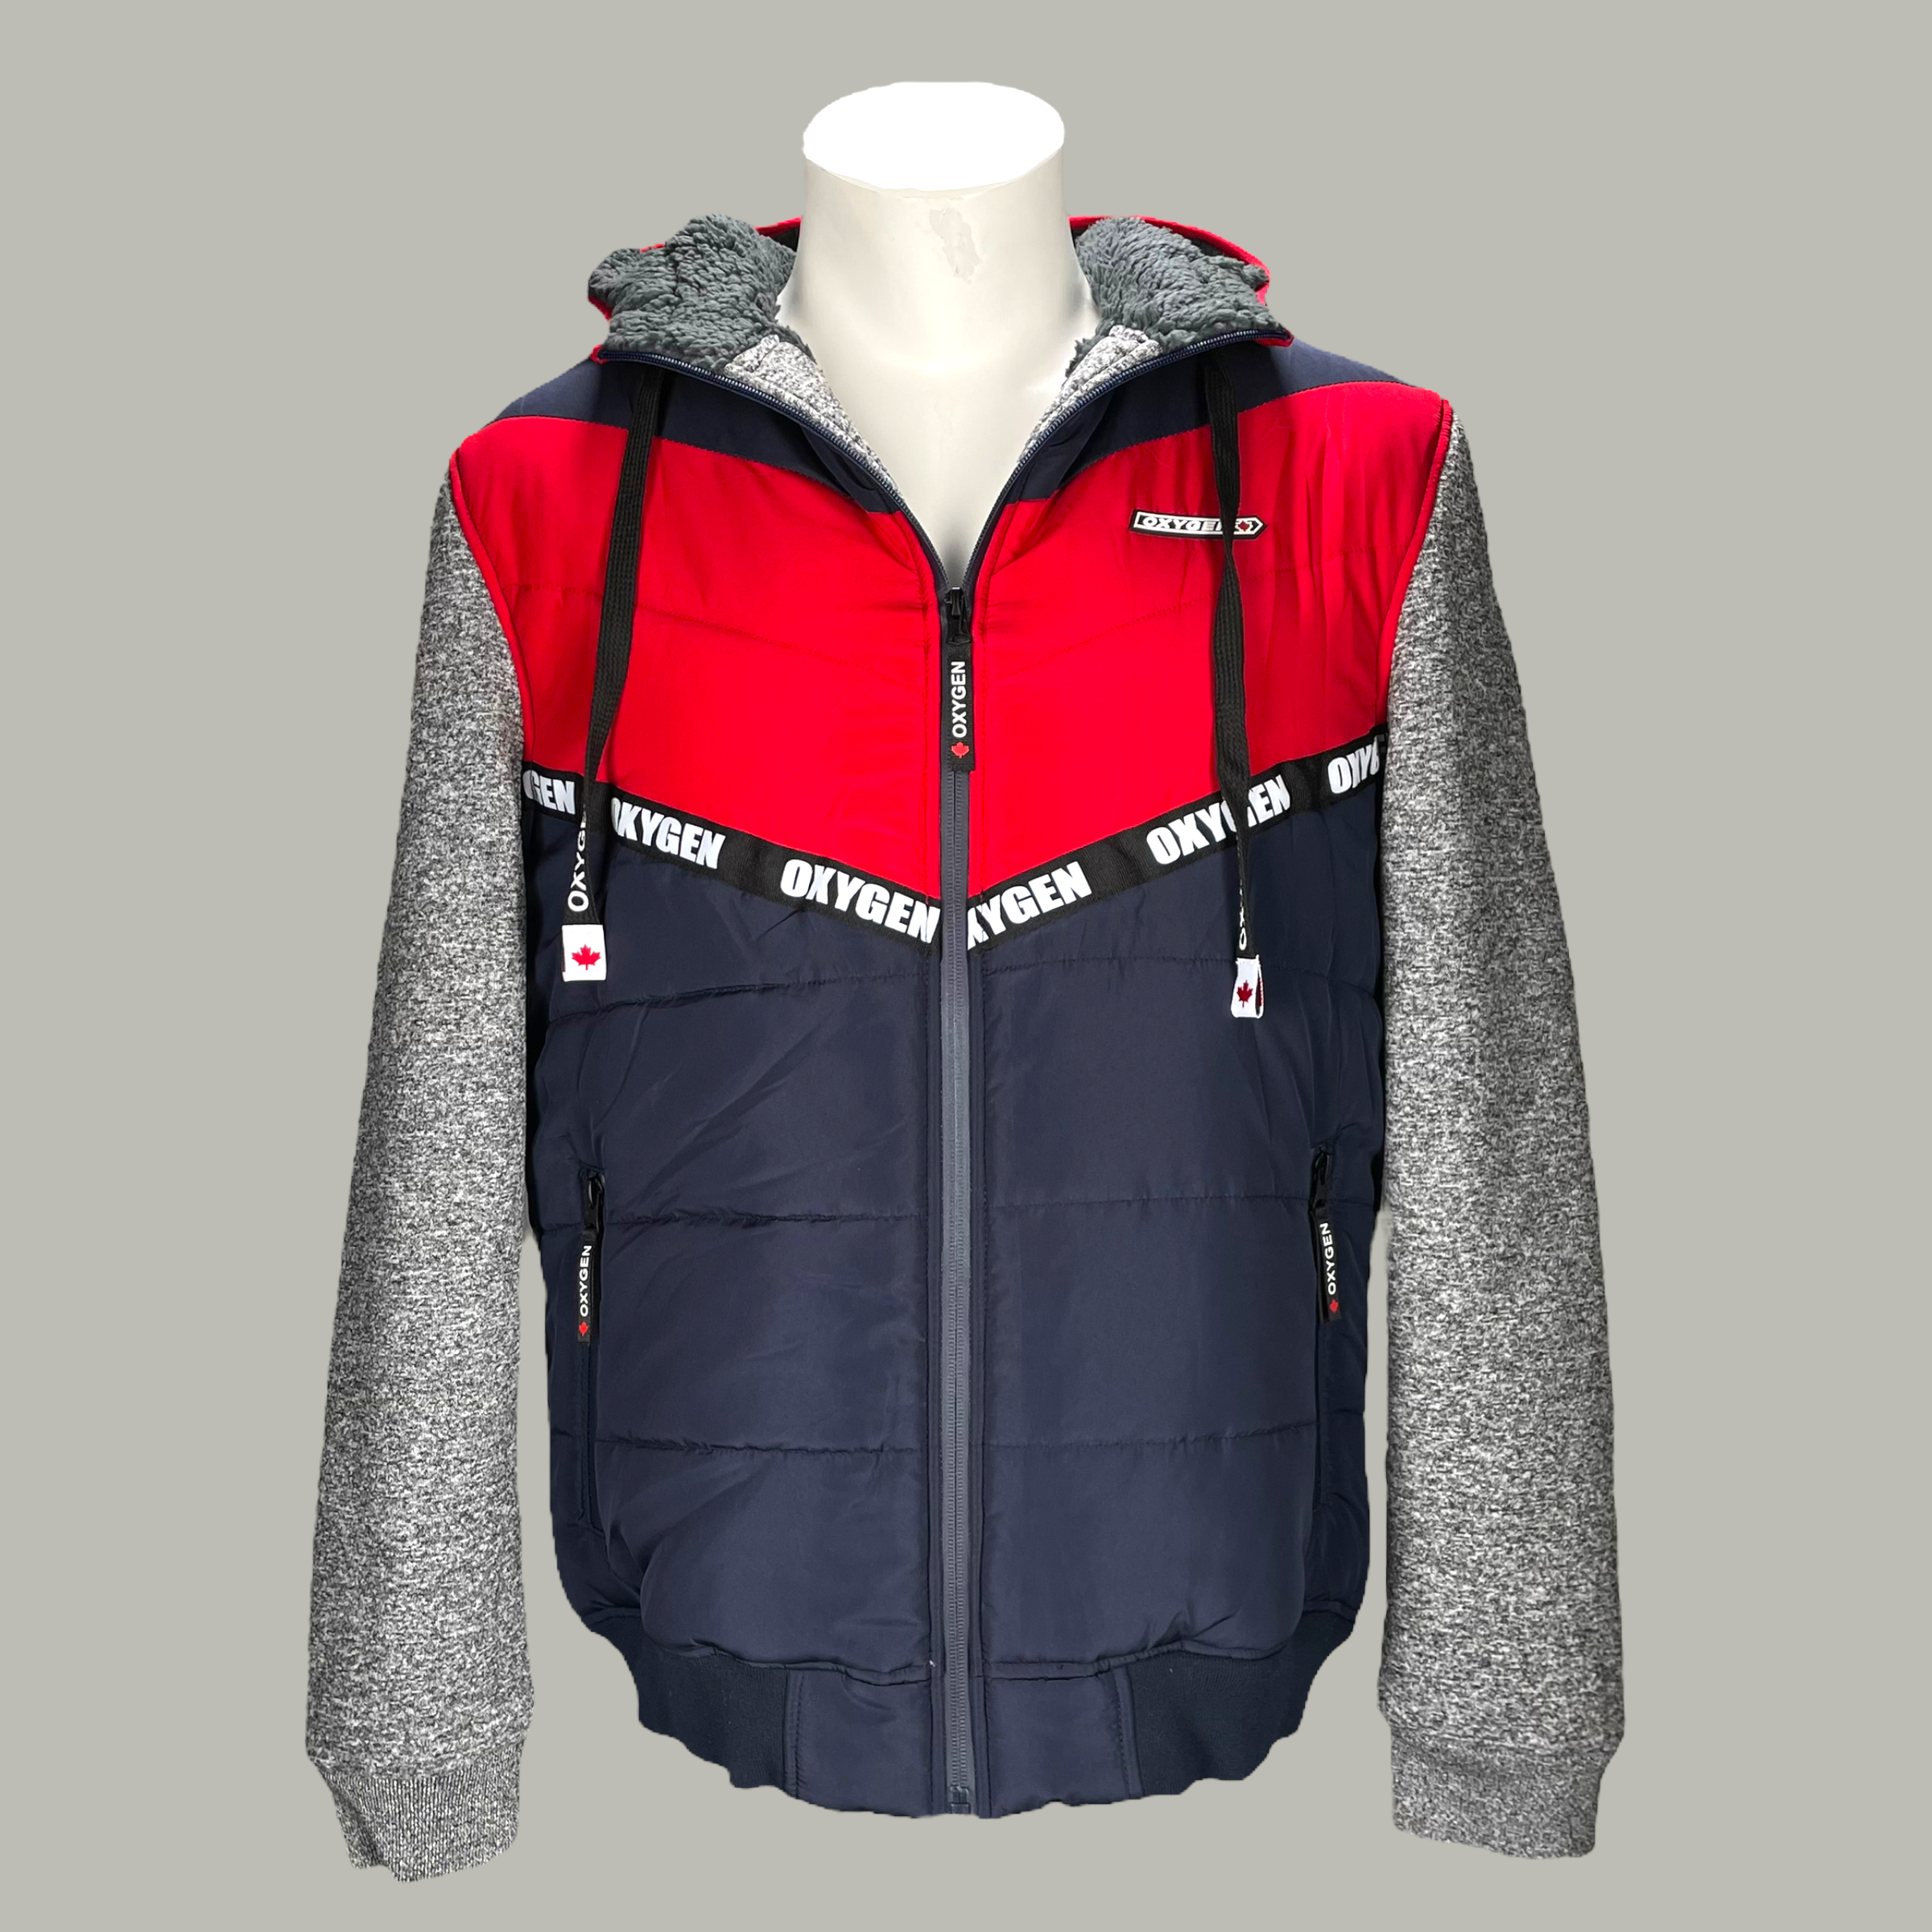 MS100-442NAVY HOODY WITH CORD